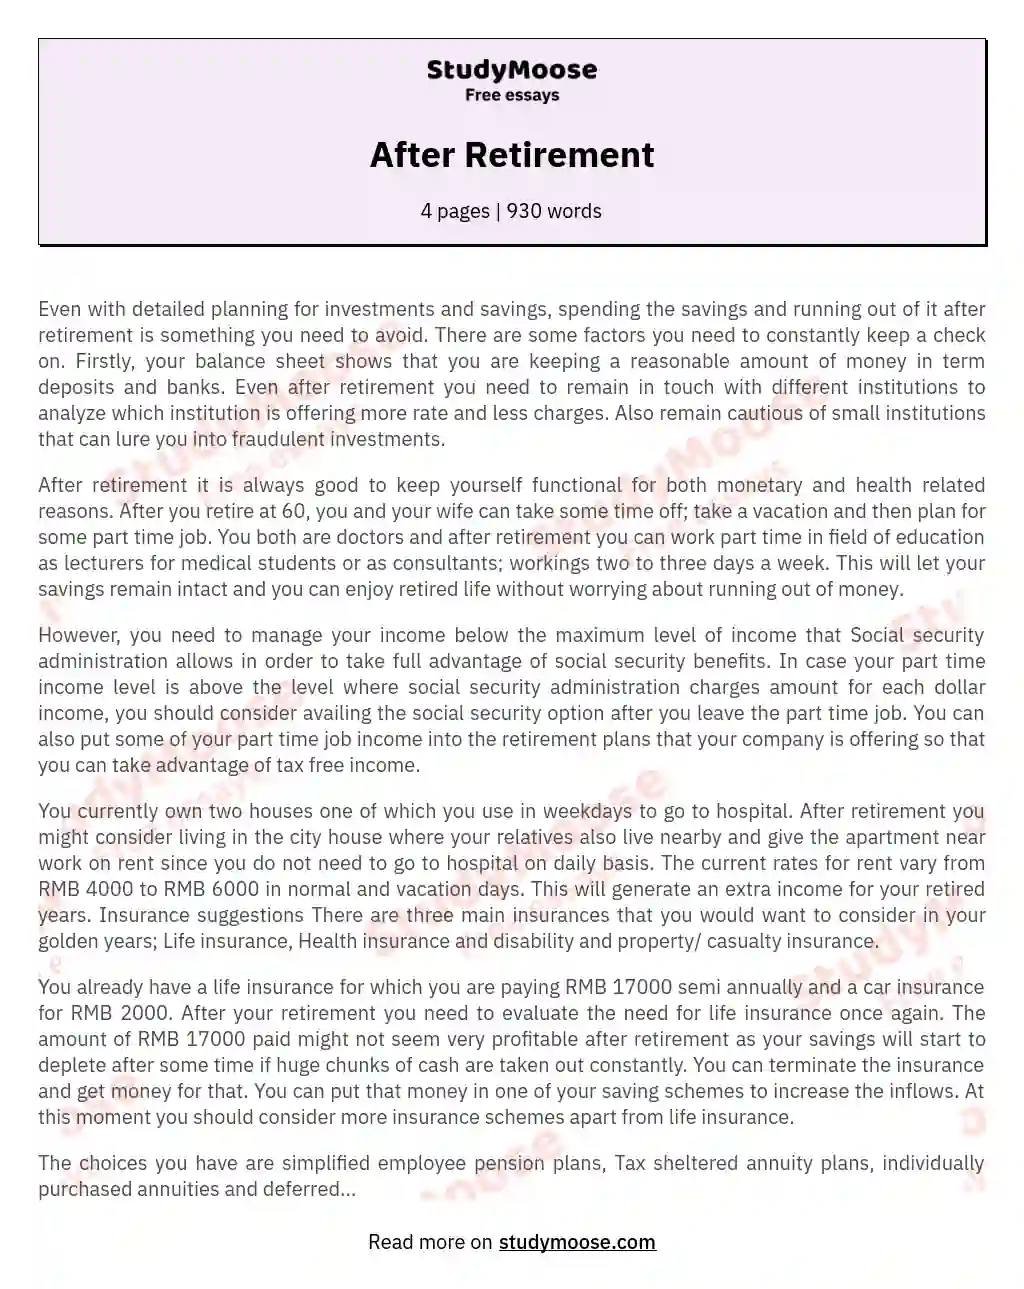 After Retirement